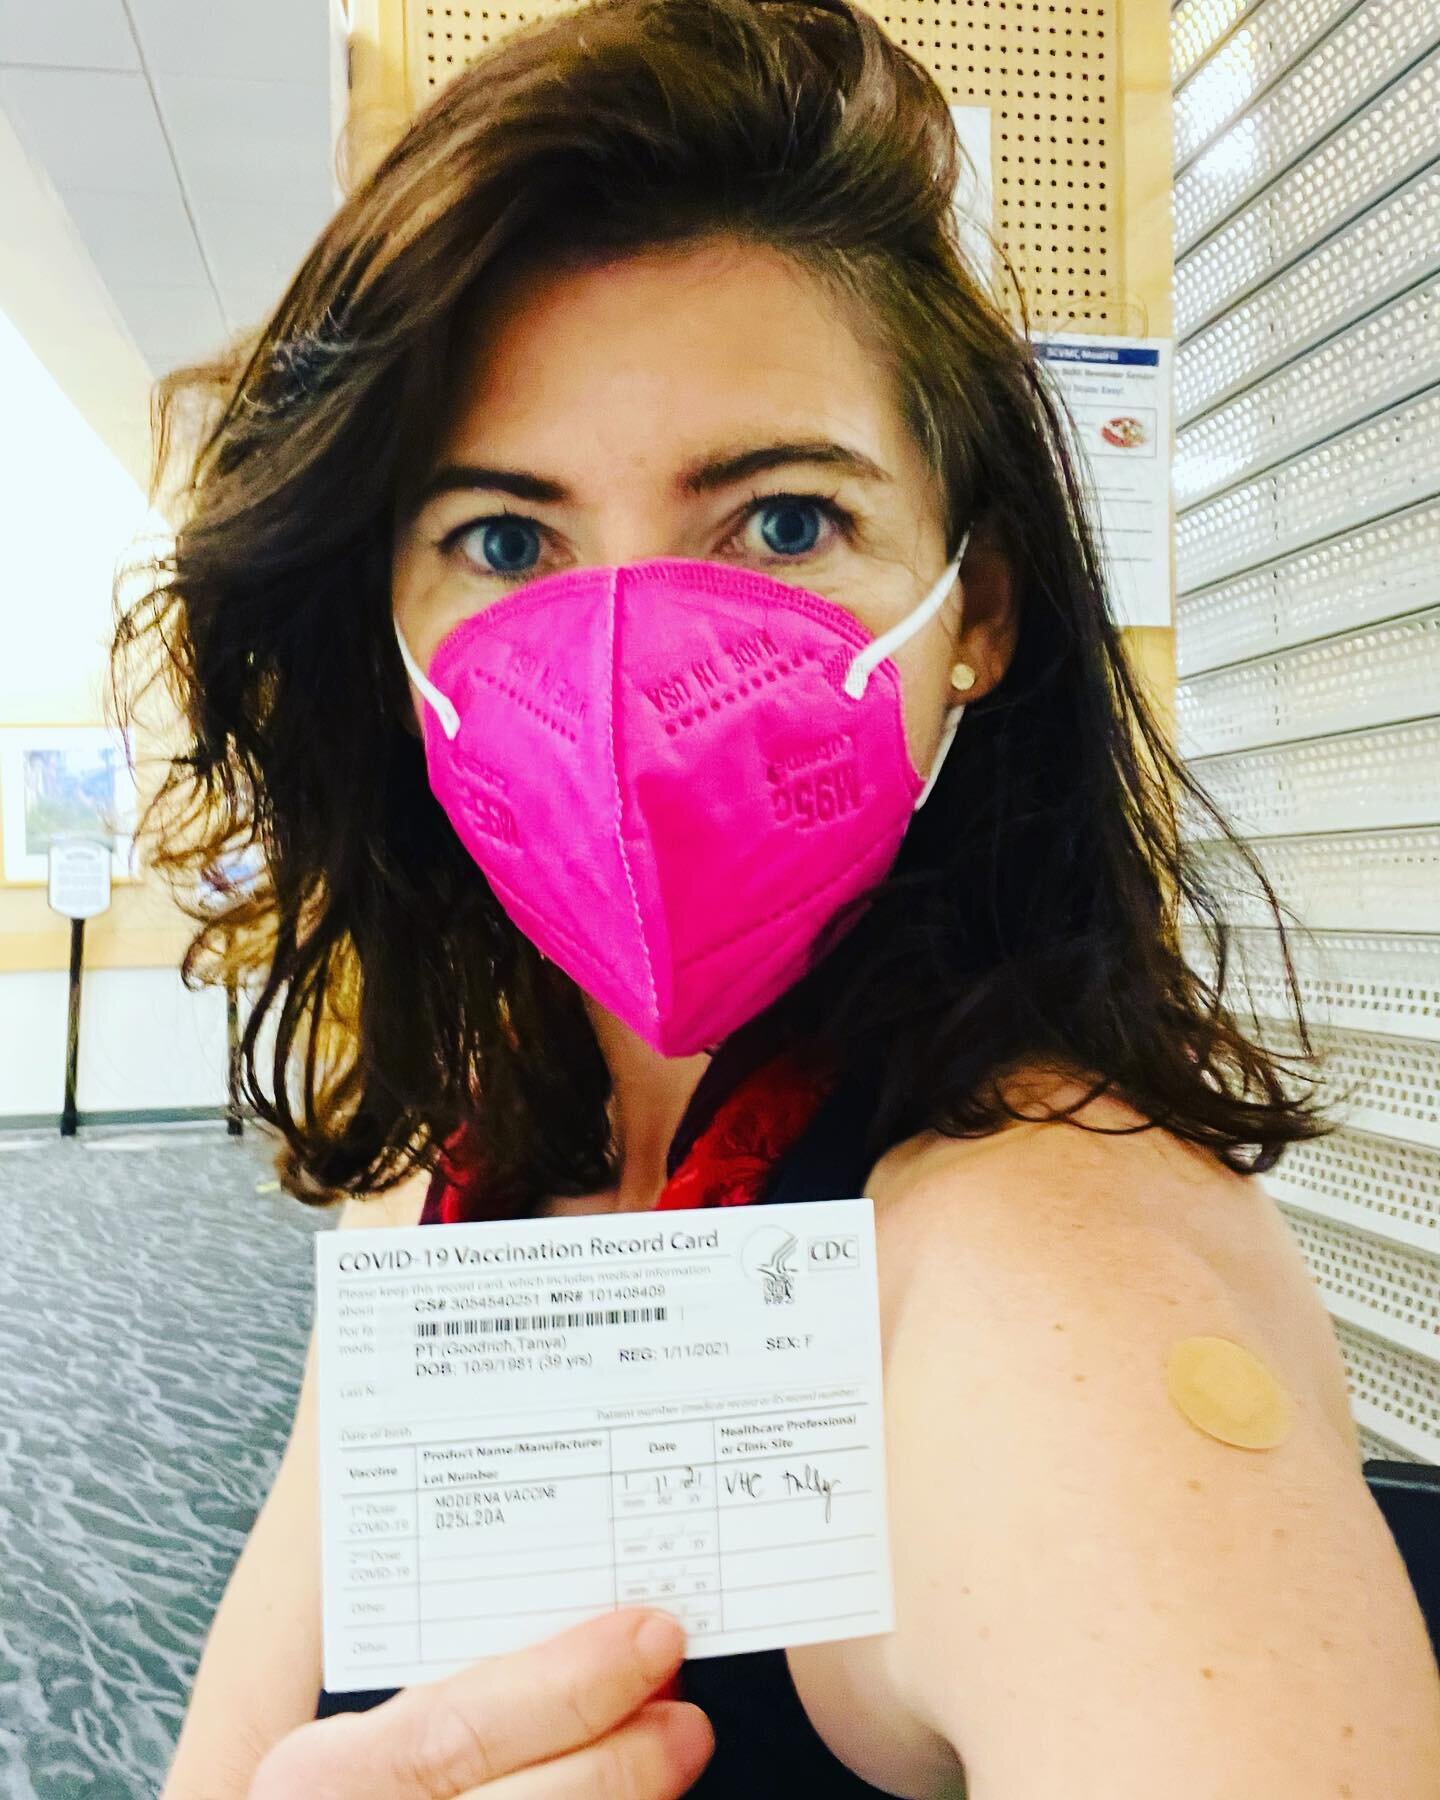 Today is good day to be vaccinated 💉! I am jubilant to have received my 1st dose.  And, the flu shot was worse. Cheers to science 🧬!